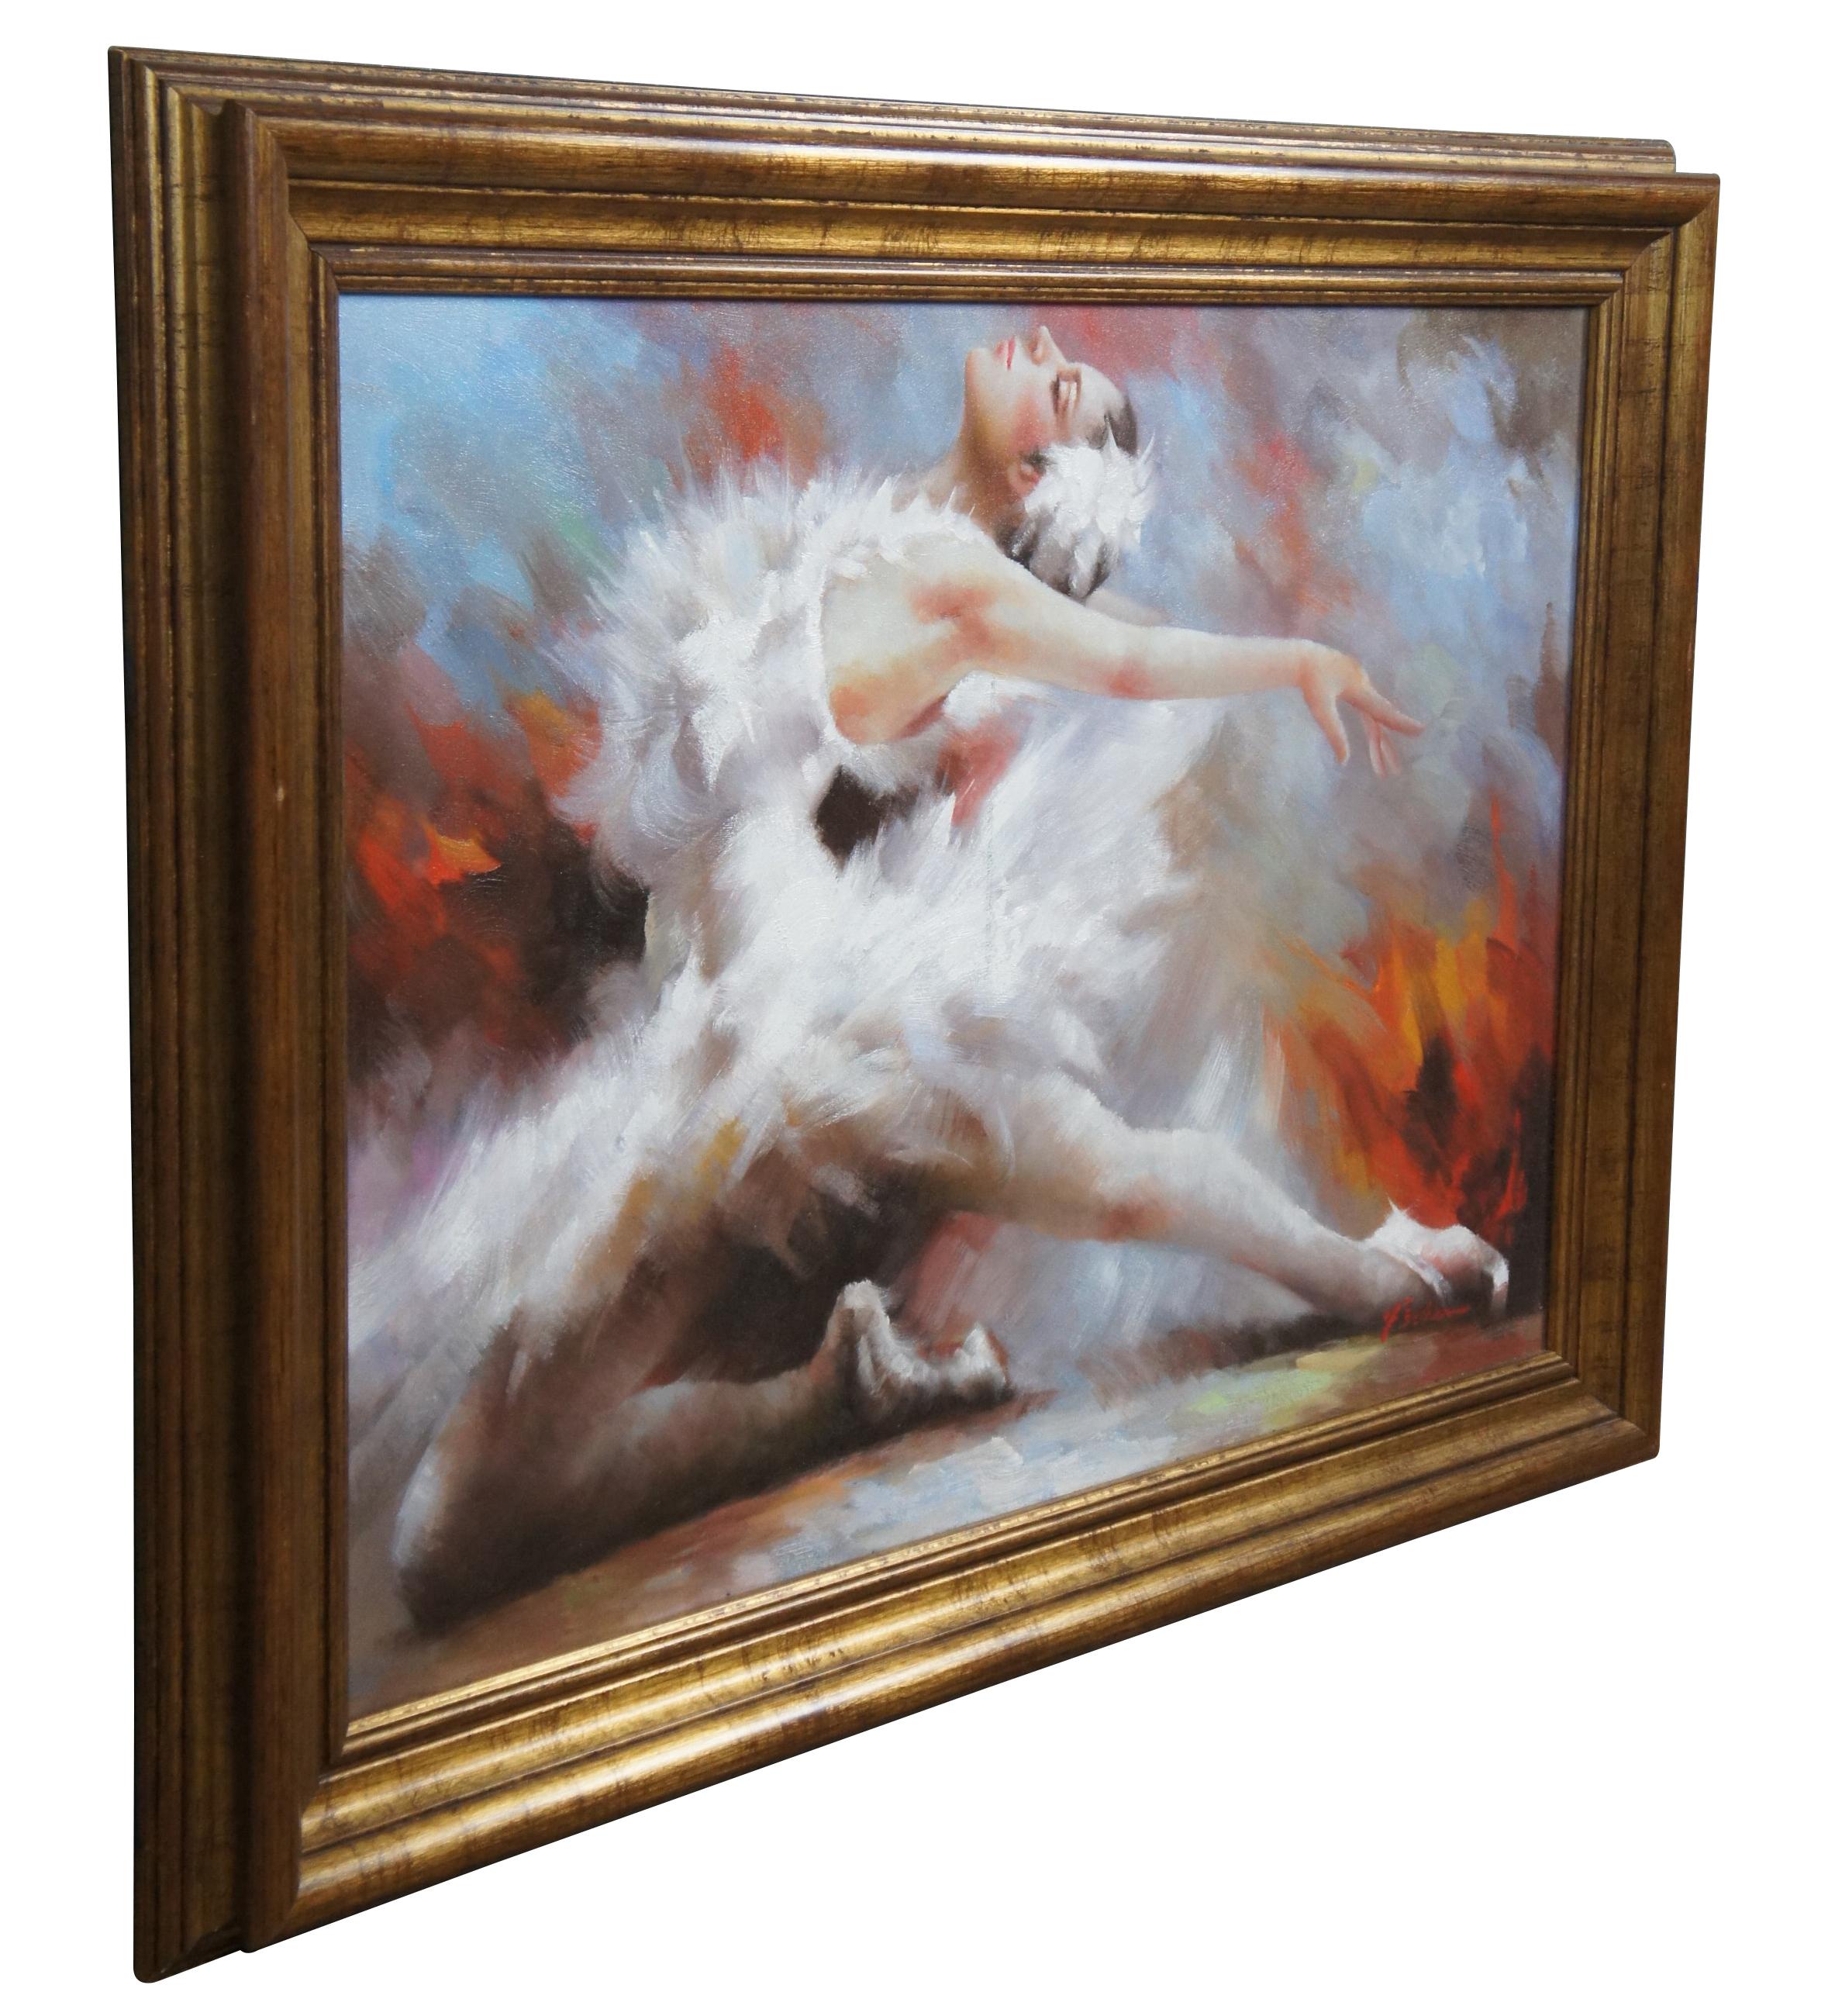 An impressionist style oil painting of a ballerina striking a pose. Signed lower right by Fisher. Framed in gold.

Dimensions

42